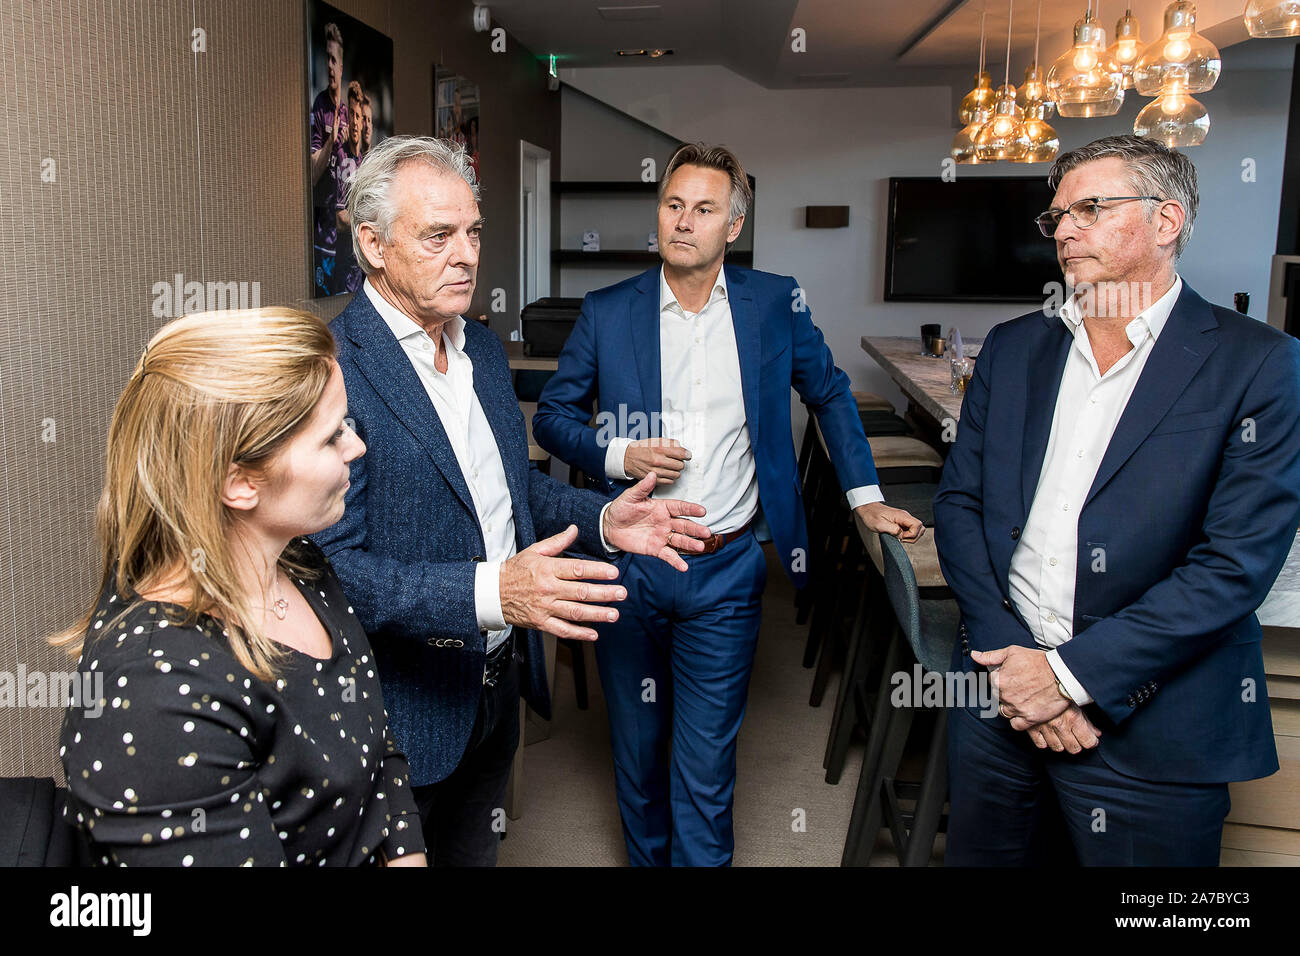 Tilburg - CareLyn 31-10-2019. Koning Willem II stadion. Buitensport, Voetbal. Willem II is the first BVO that concerns about skin cancer and signs a contract with CareLyn. Rene van der Klok, Arjan Gundlach, Martin van Geel Credit: Pro Shots/Alamy Live News Stock Photo